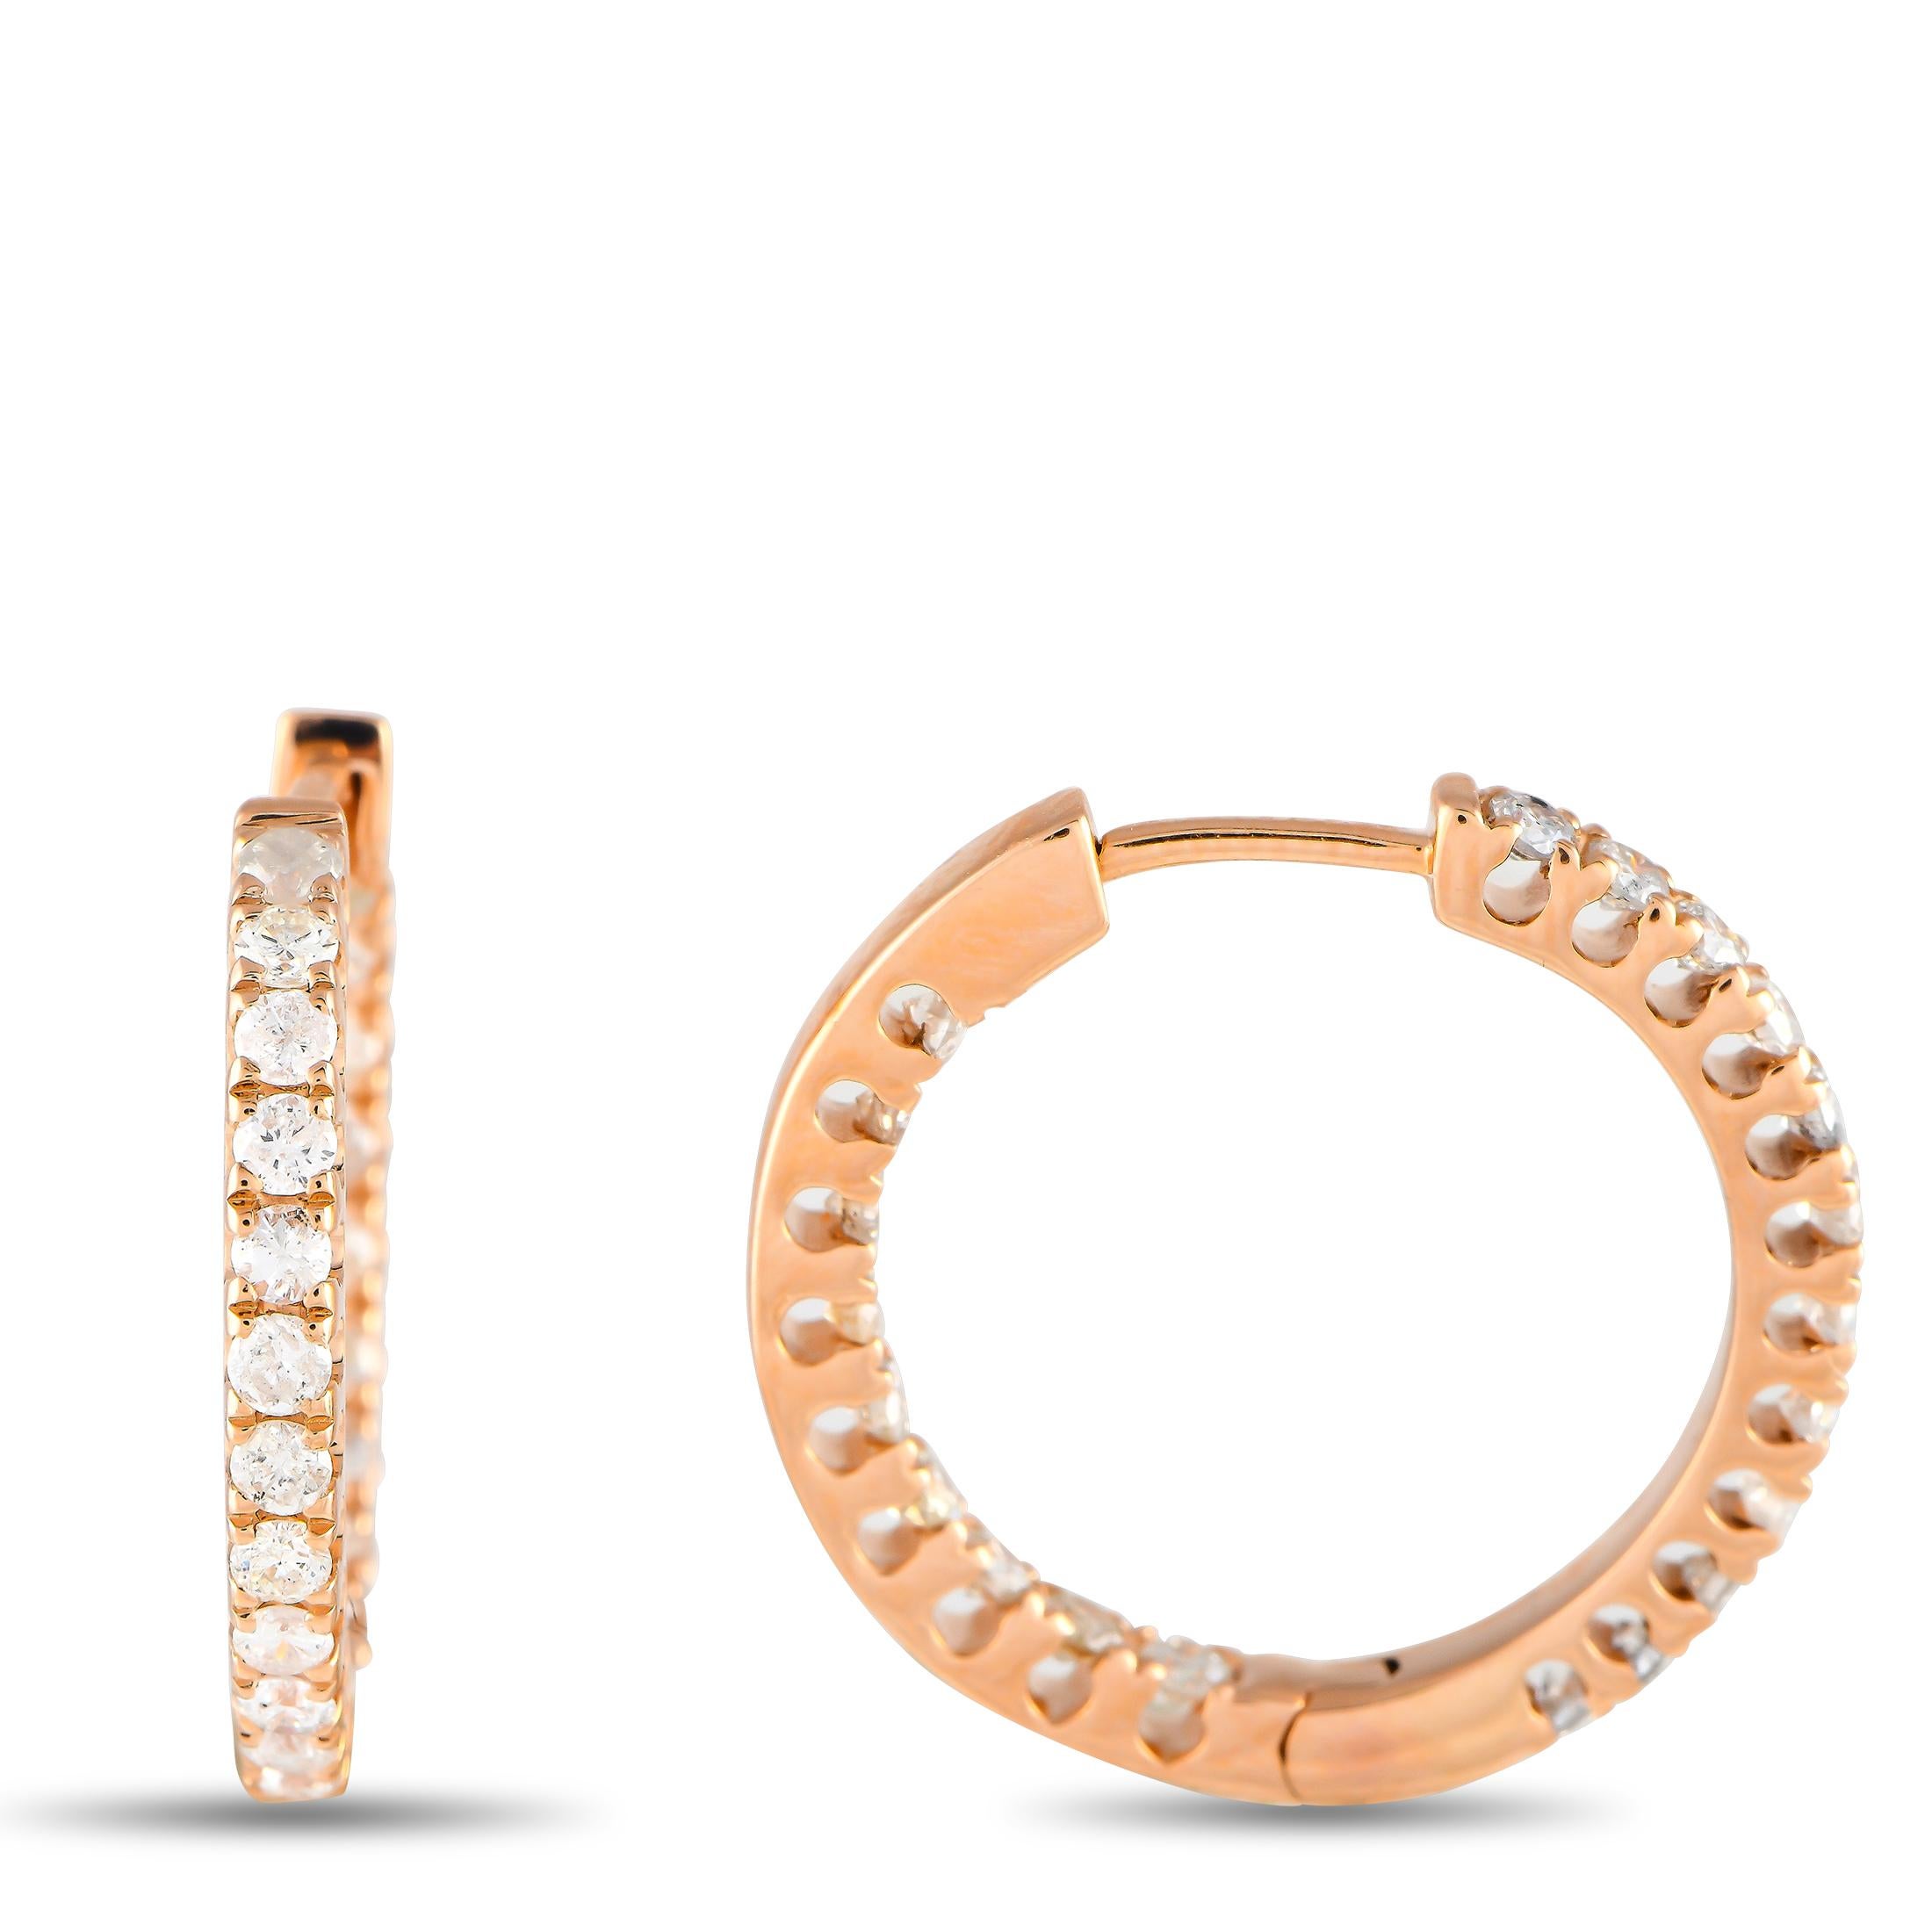 Unleash the goddess in you with this pair of rose gold ear sparklers. Each 0.75 hoop comes traced with an inner and outer row of bright white diamonds for a noticeable shimmer at any angle. Each hoop has a hinged snap closure.This pair of 14K Rose